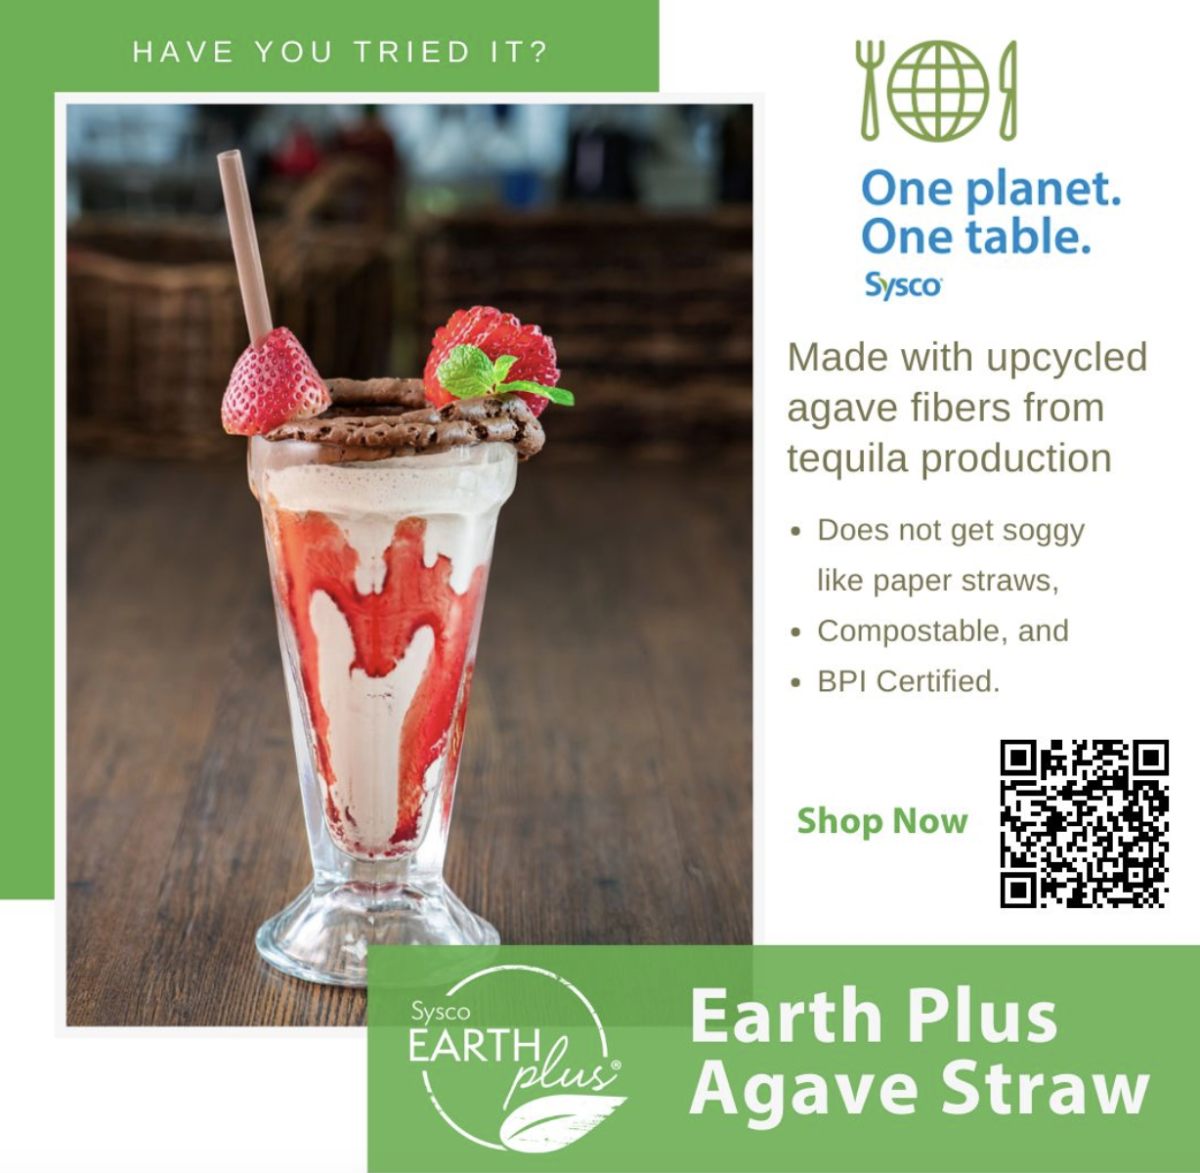 CSRWire - Sysco’s Earth Plus Agave Straws are Affordable, Planet ...